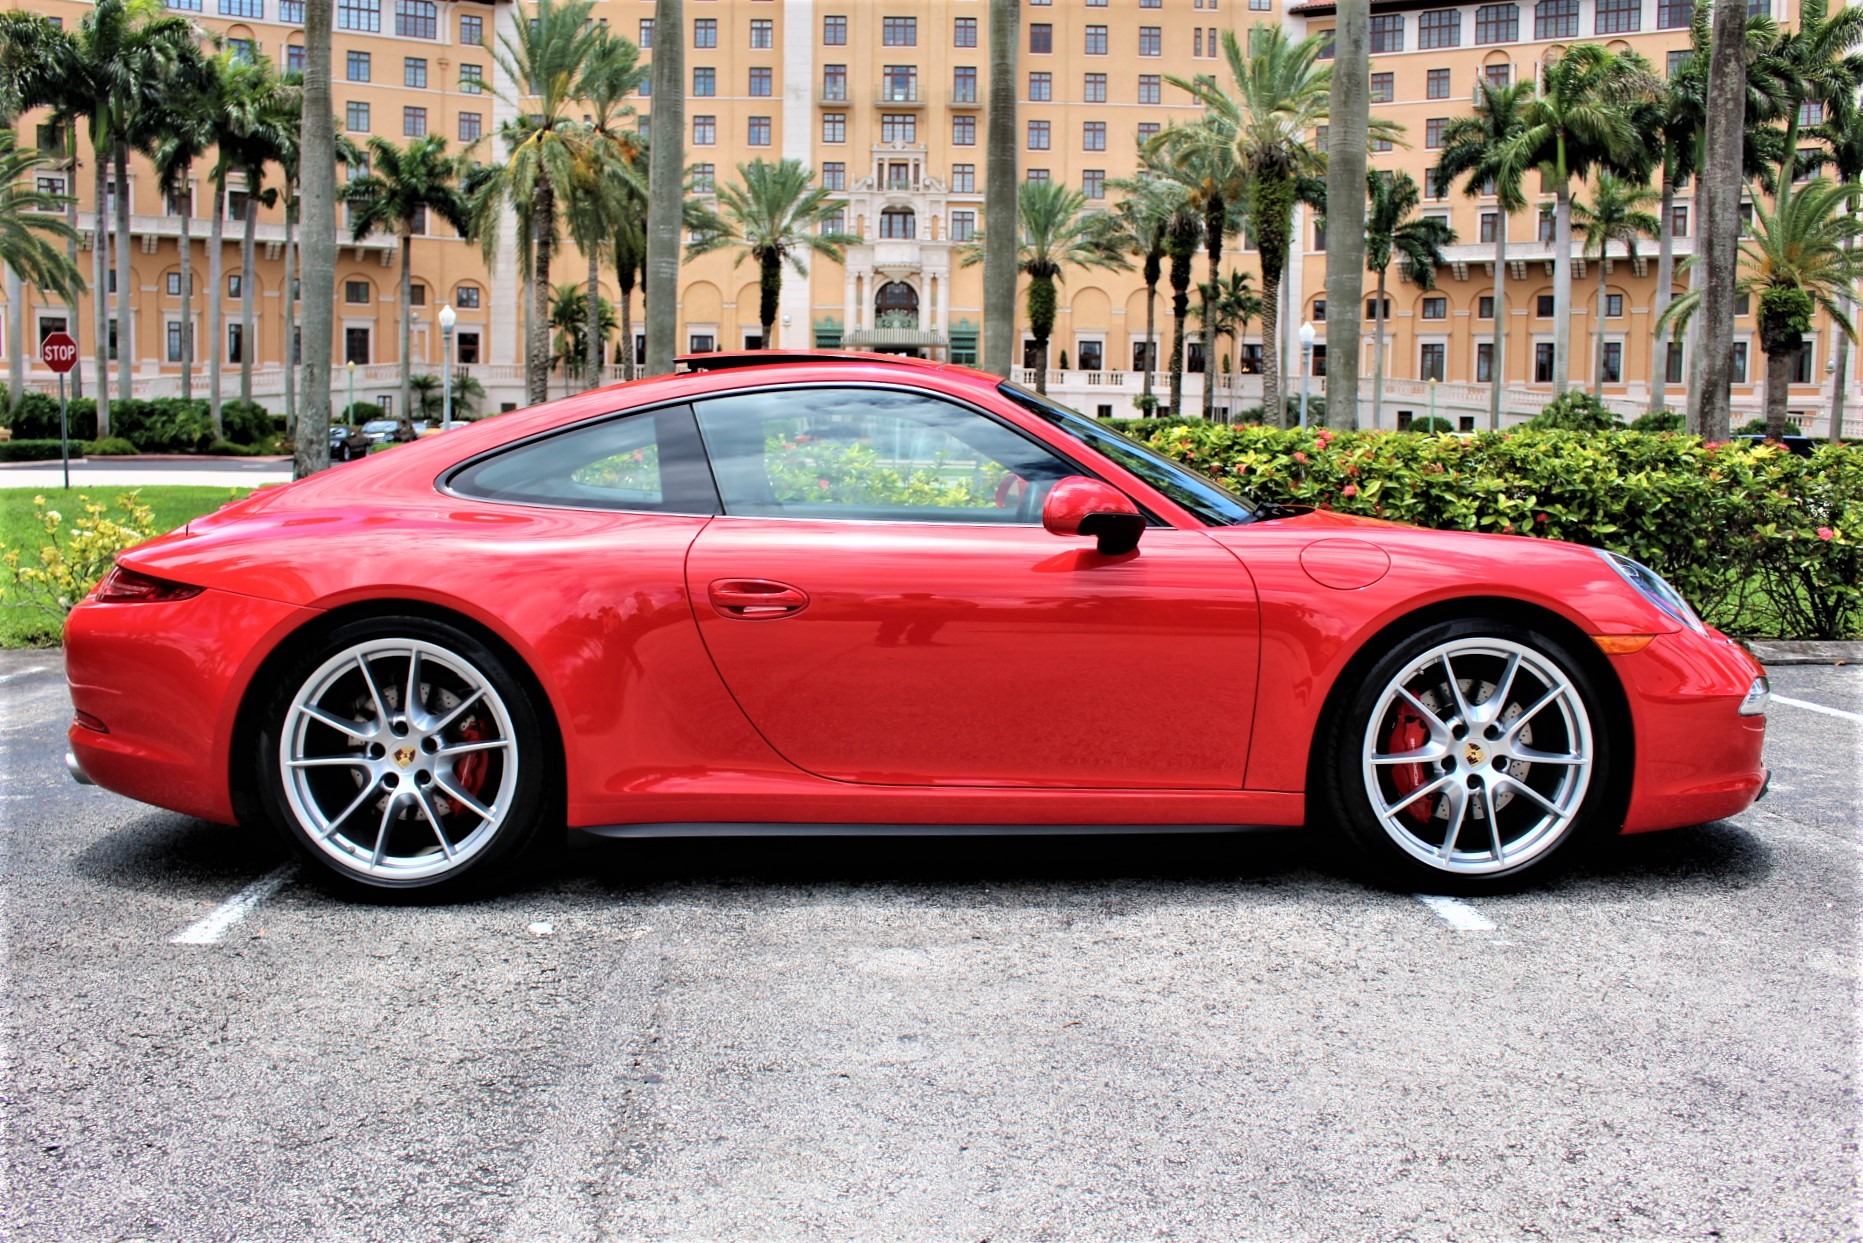 Used 2014 Porsche 911 Carrera 4S for sale Sold at The Gables Sports Cars in Miami FL 33146 1